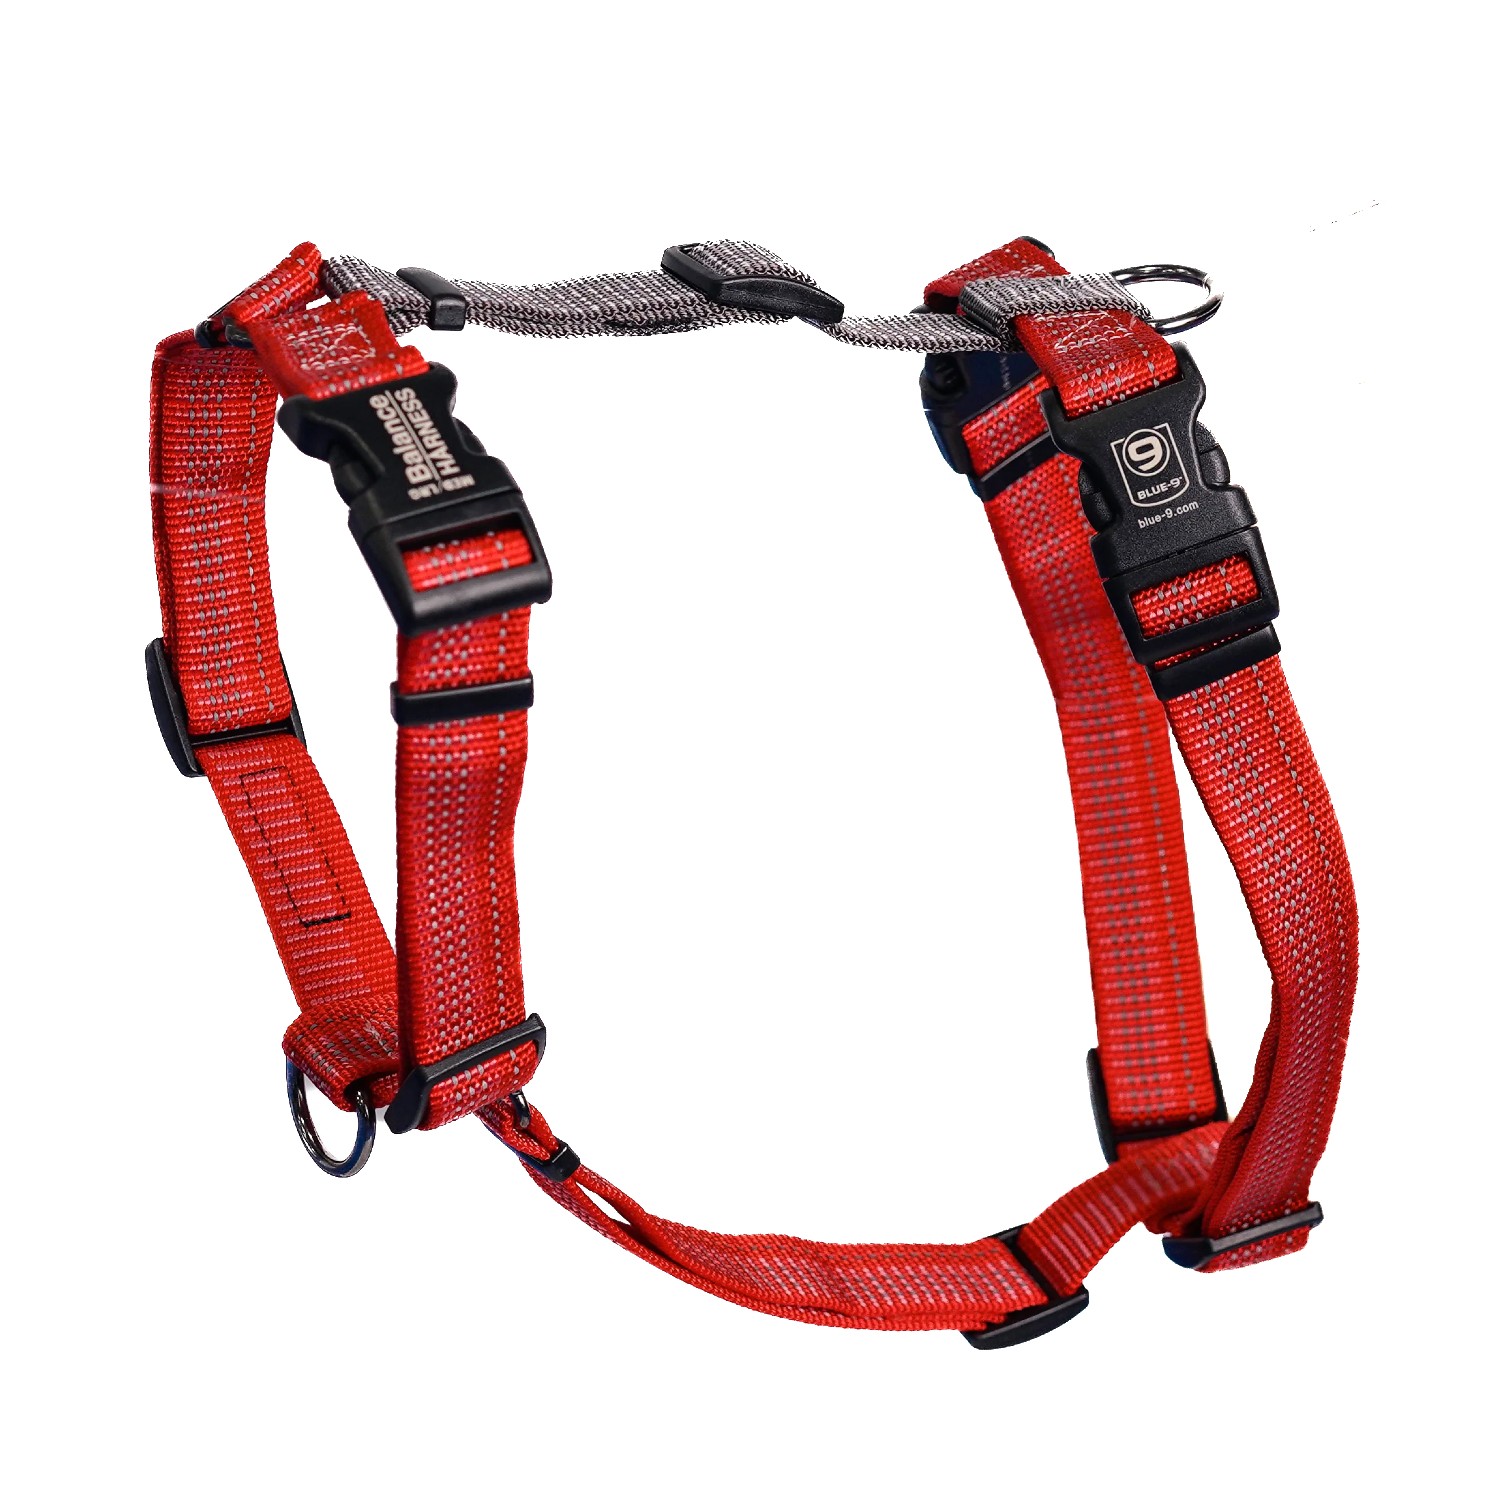 Blue-9 Reflective Balance No-Pull Harness Buckle-Neck - Red Ember